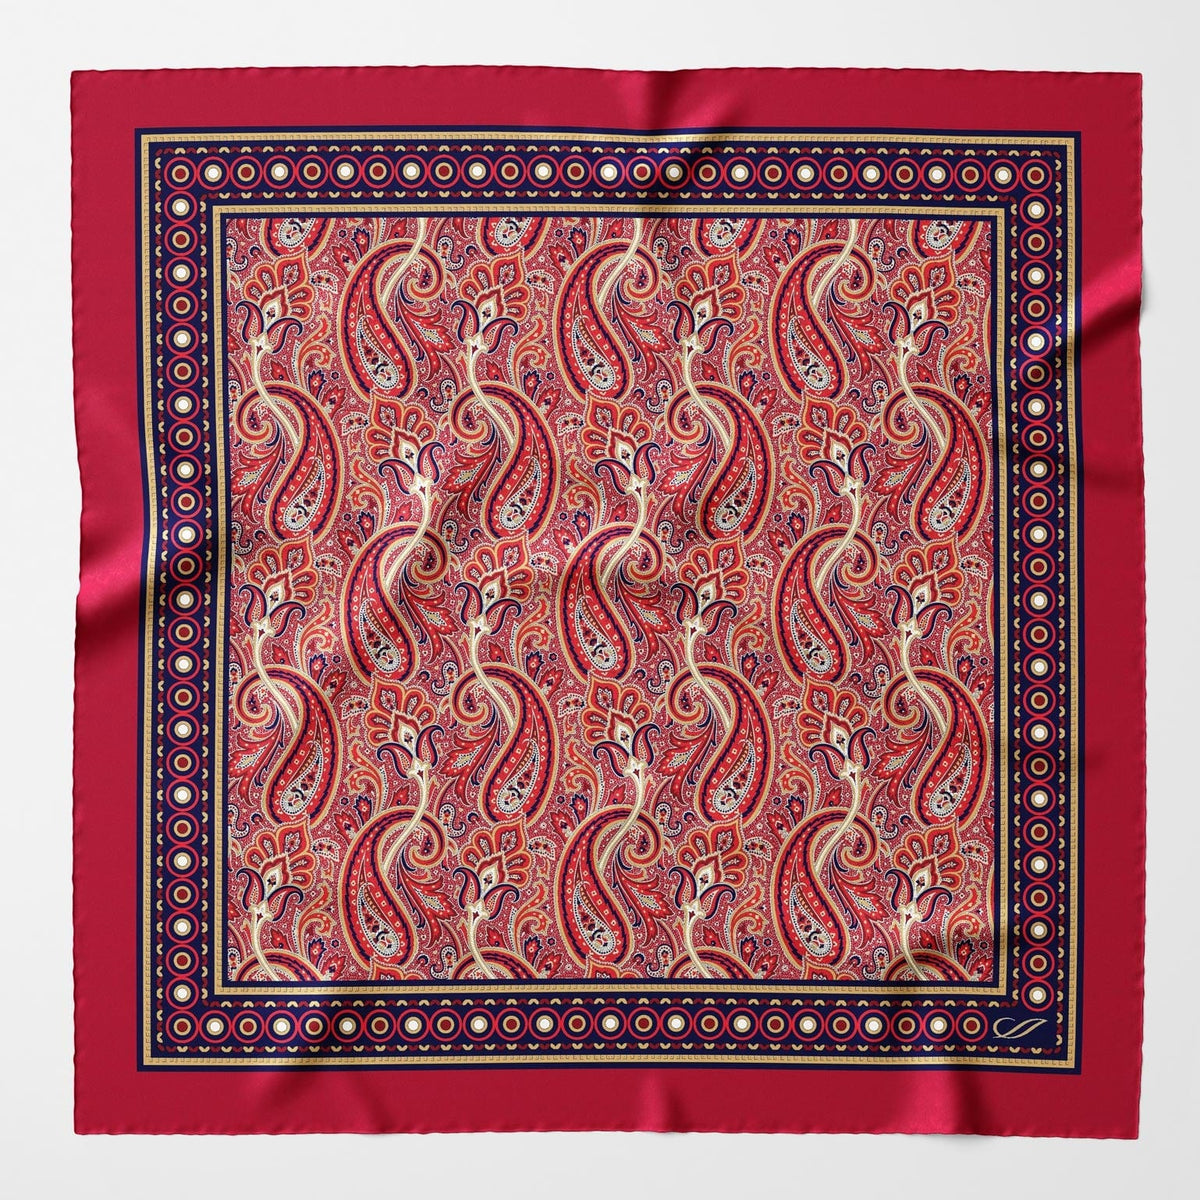 Large Silk Pocket Square - Red Paisley